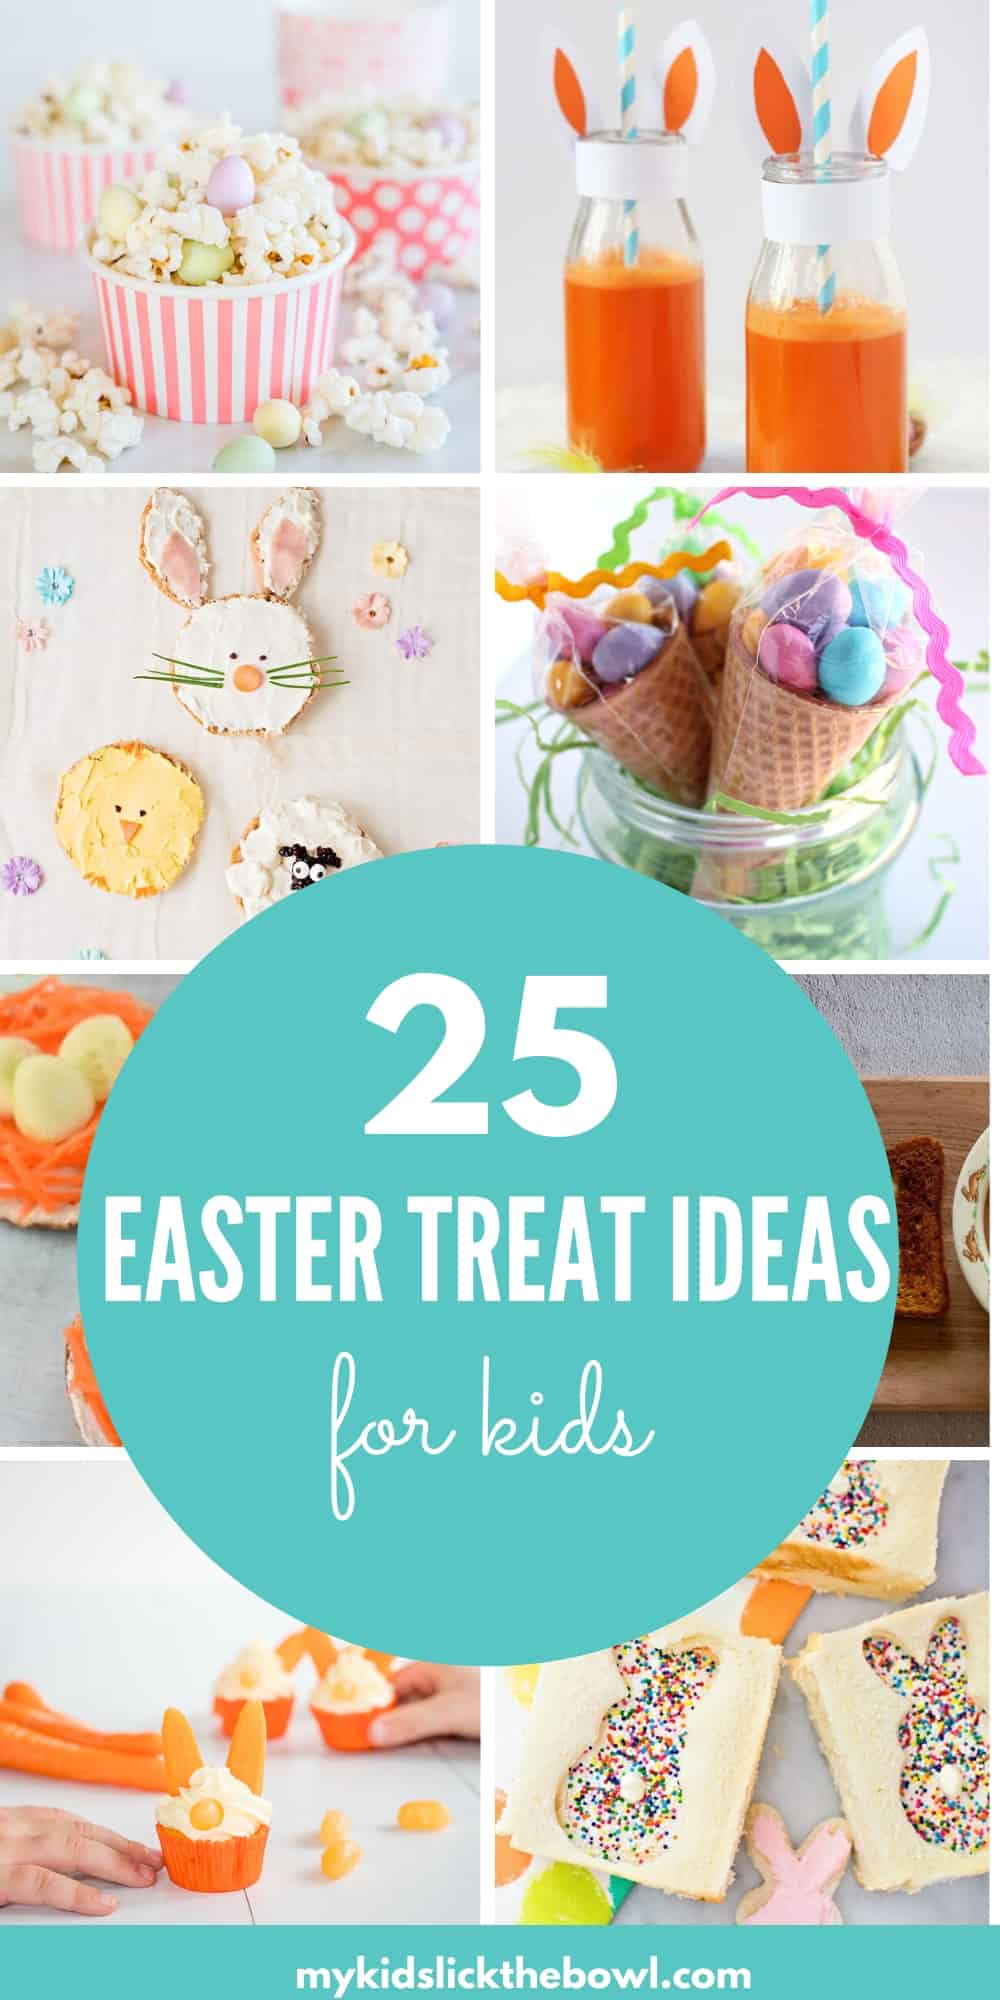 A collage of images showing easter treat ideas for kids